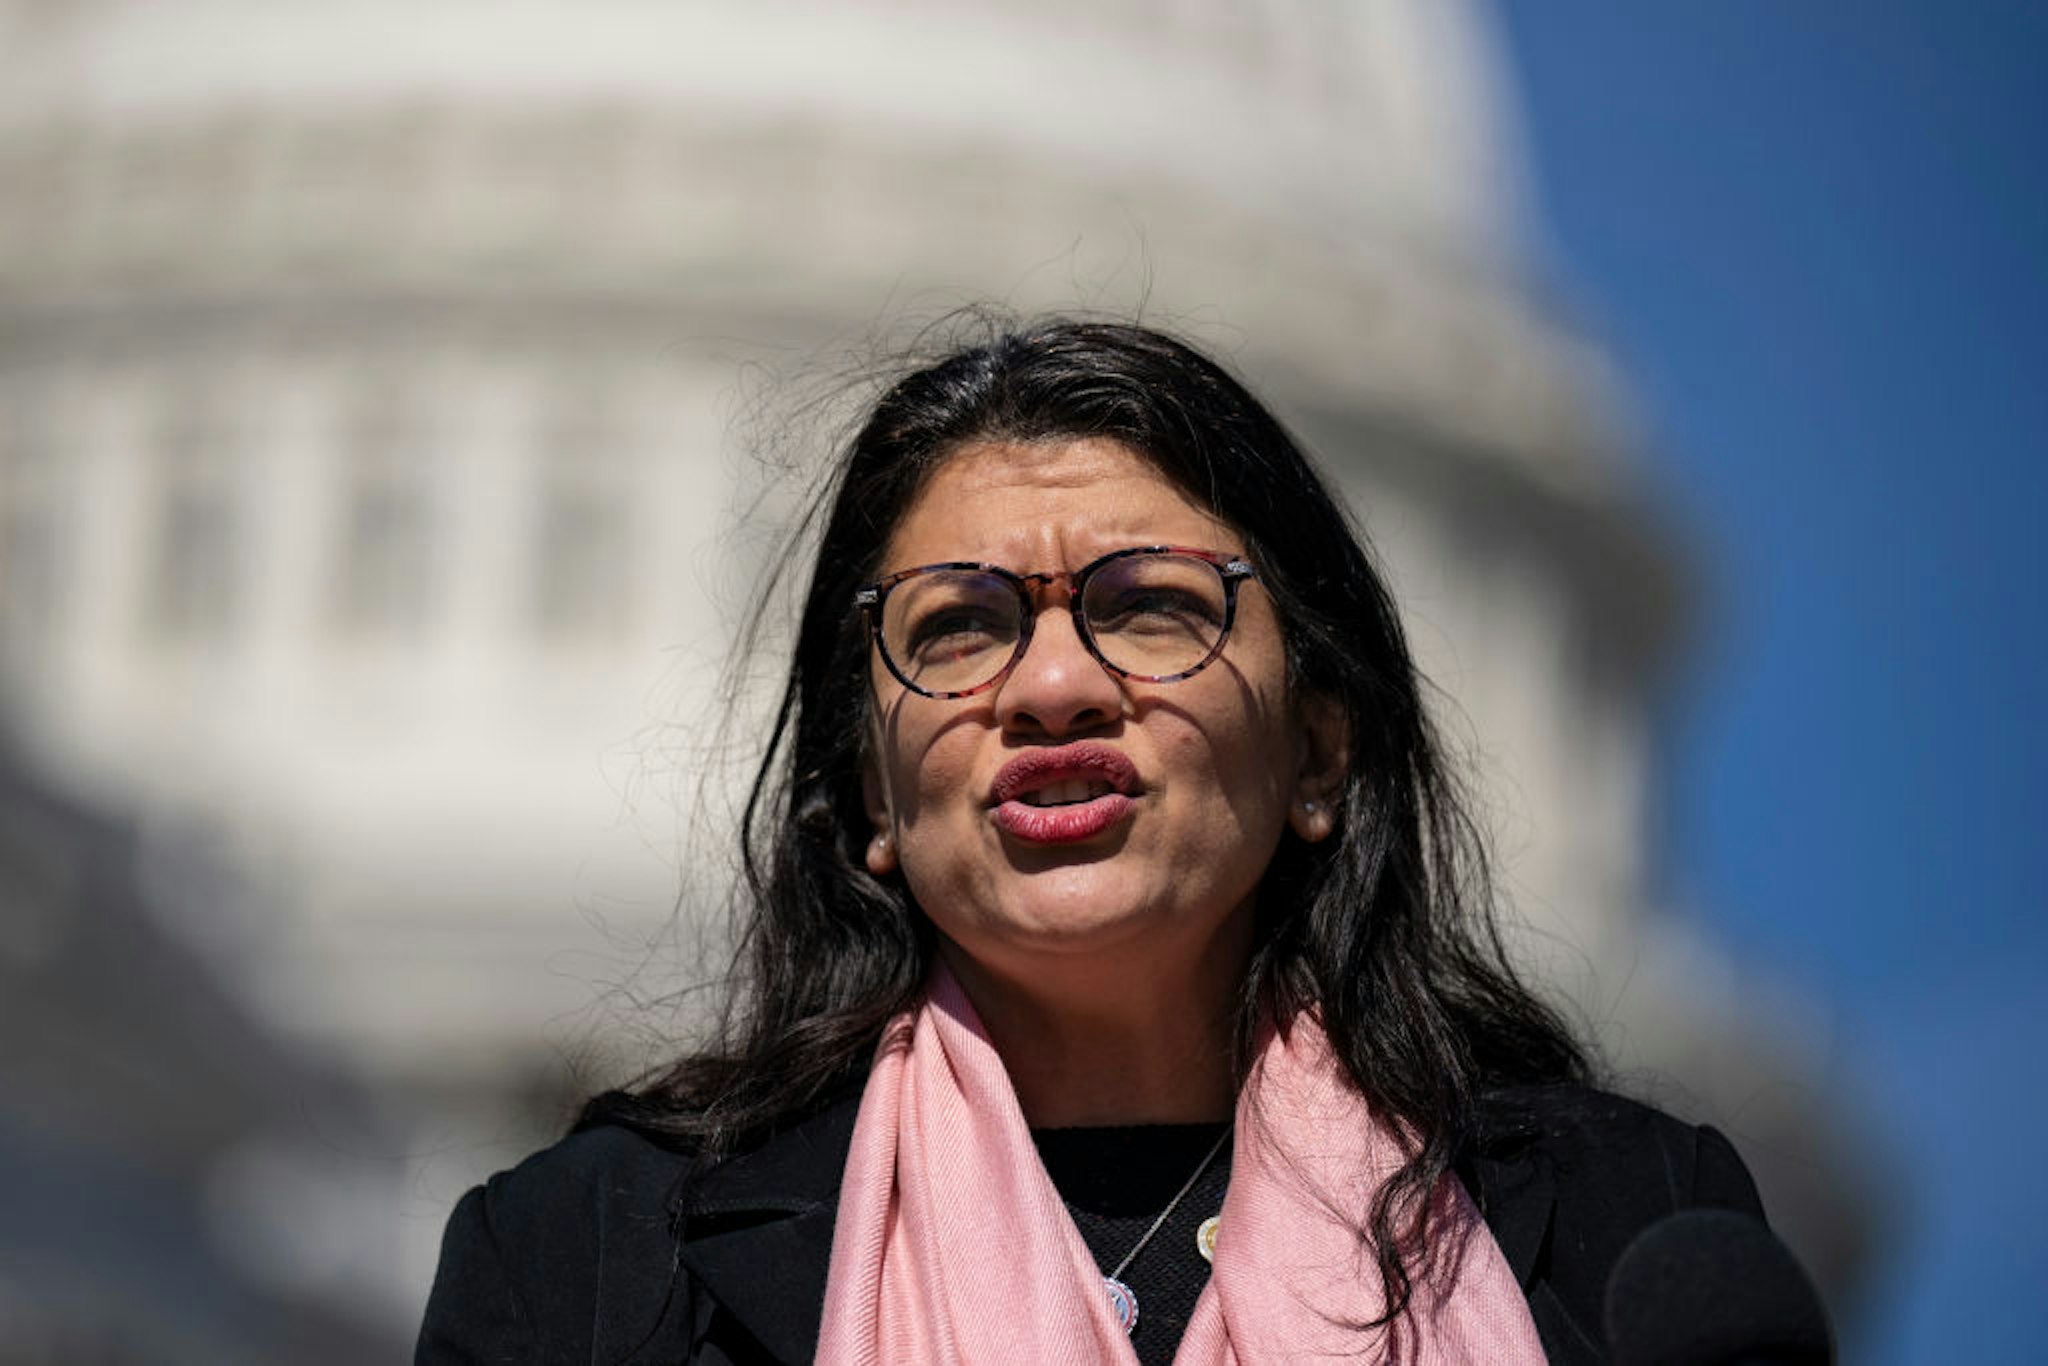 WASHINGTON, DC - MARCH 9: Rep. Rashida Tlaib (D-MI) speaks during a news conference about the Justice For All Act outside the U.S. Capitol March 9, 2023 in Washington, DC. The bill, introduced by Rep. Tlaib, aims to strengthen anti-discrimination laws. (Photo by Drew Angerer/Getty Images)